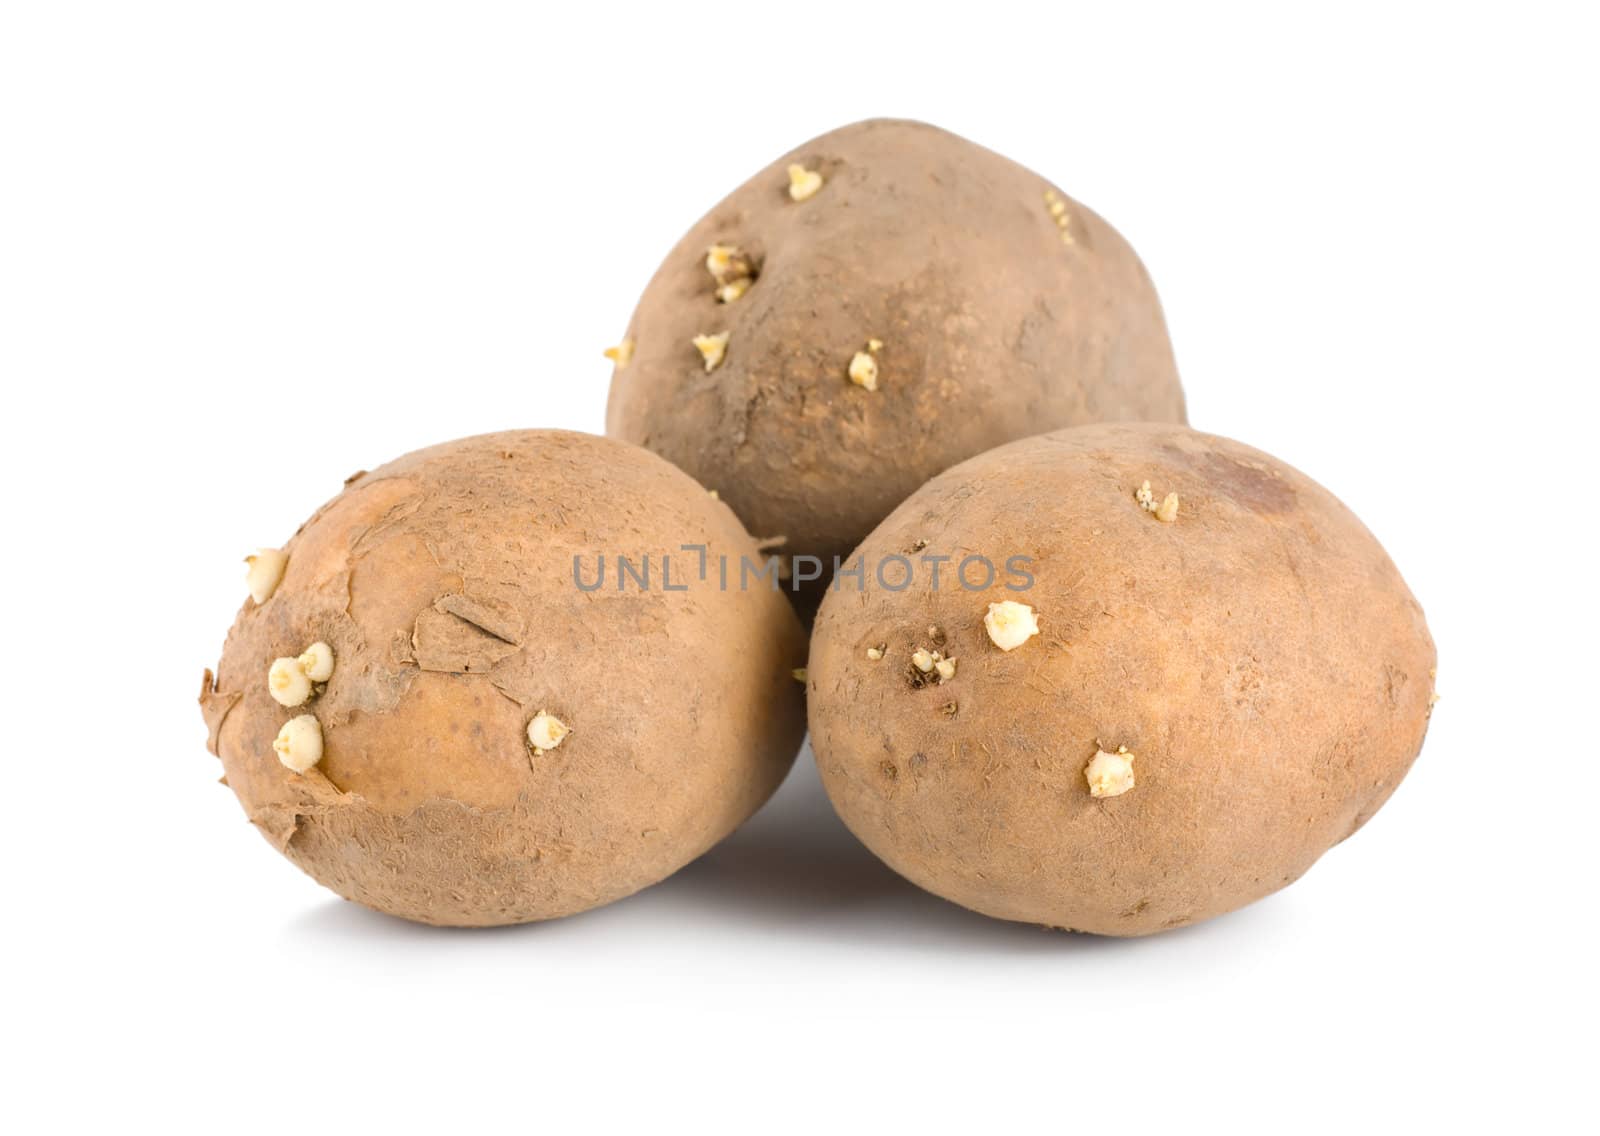 Three raw potatoes isolated on a white background